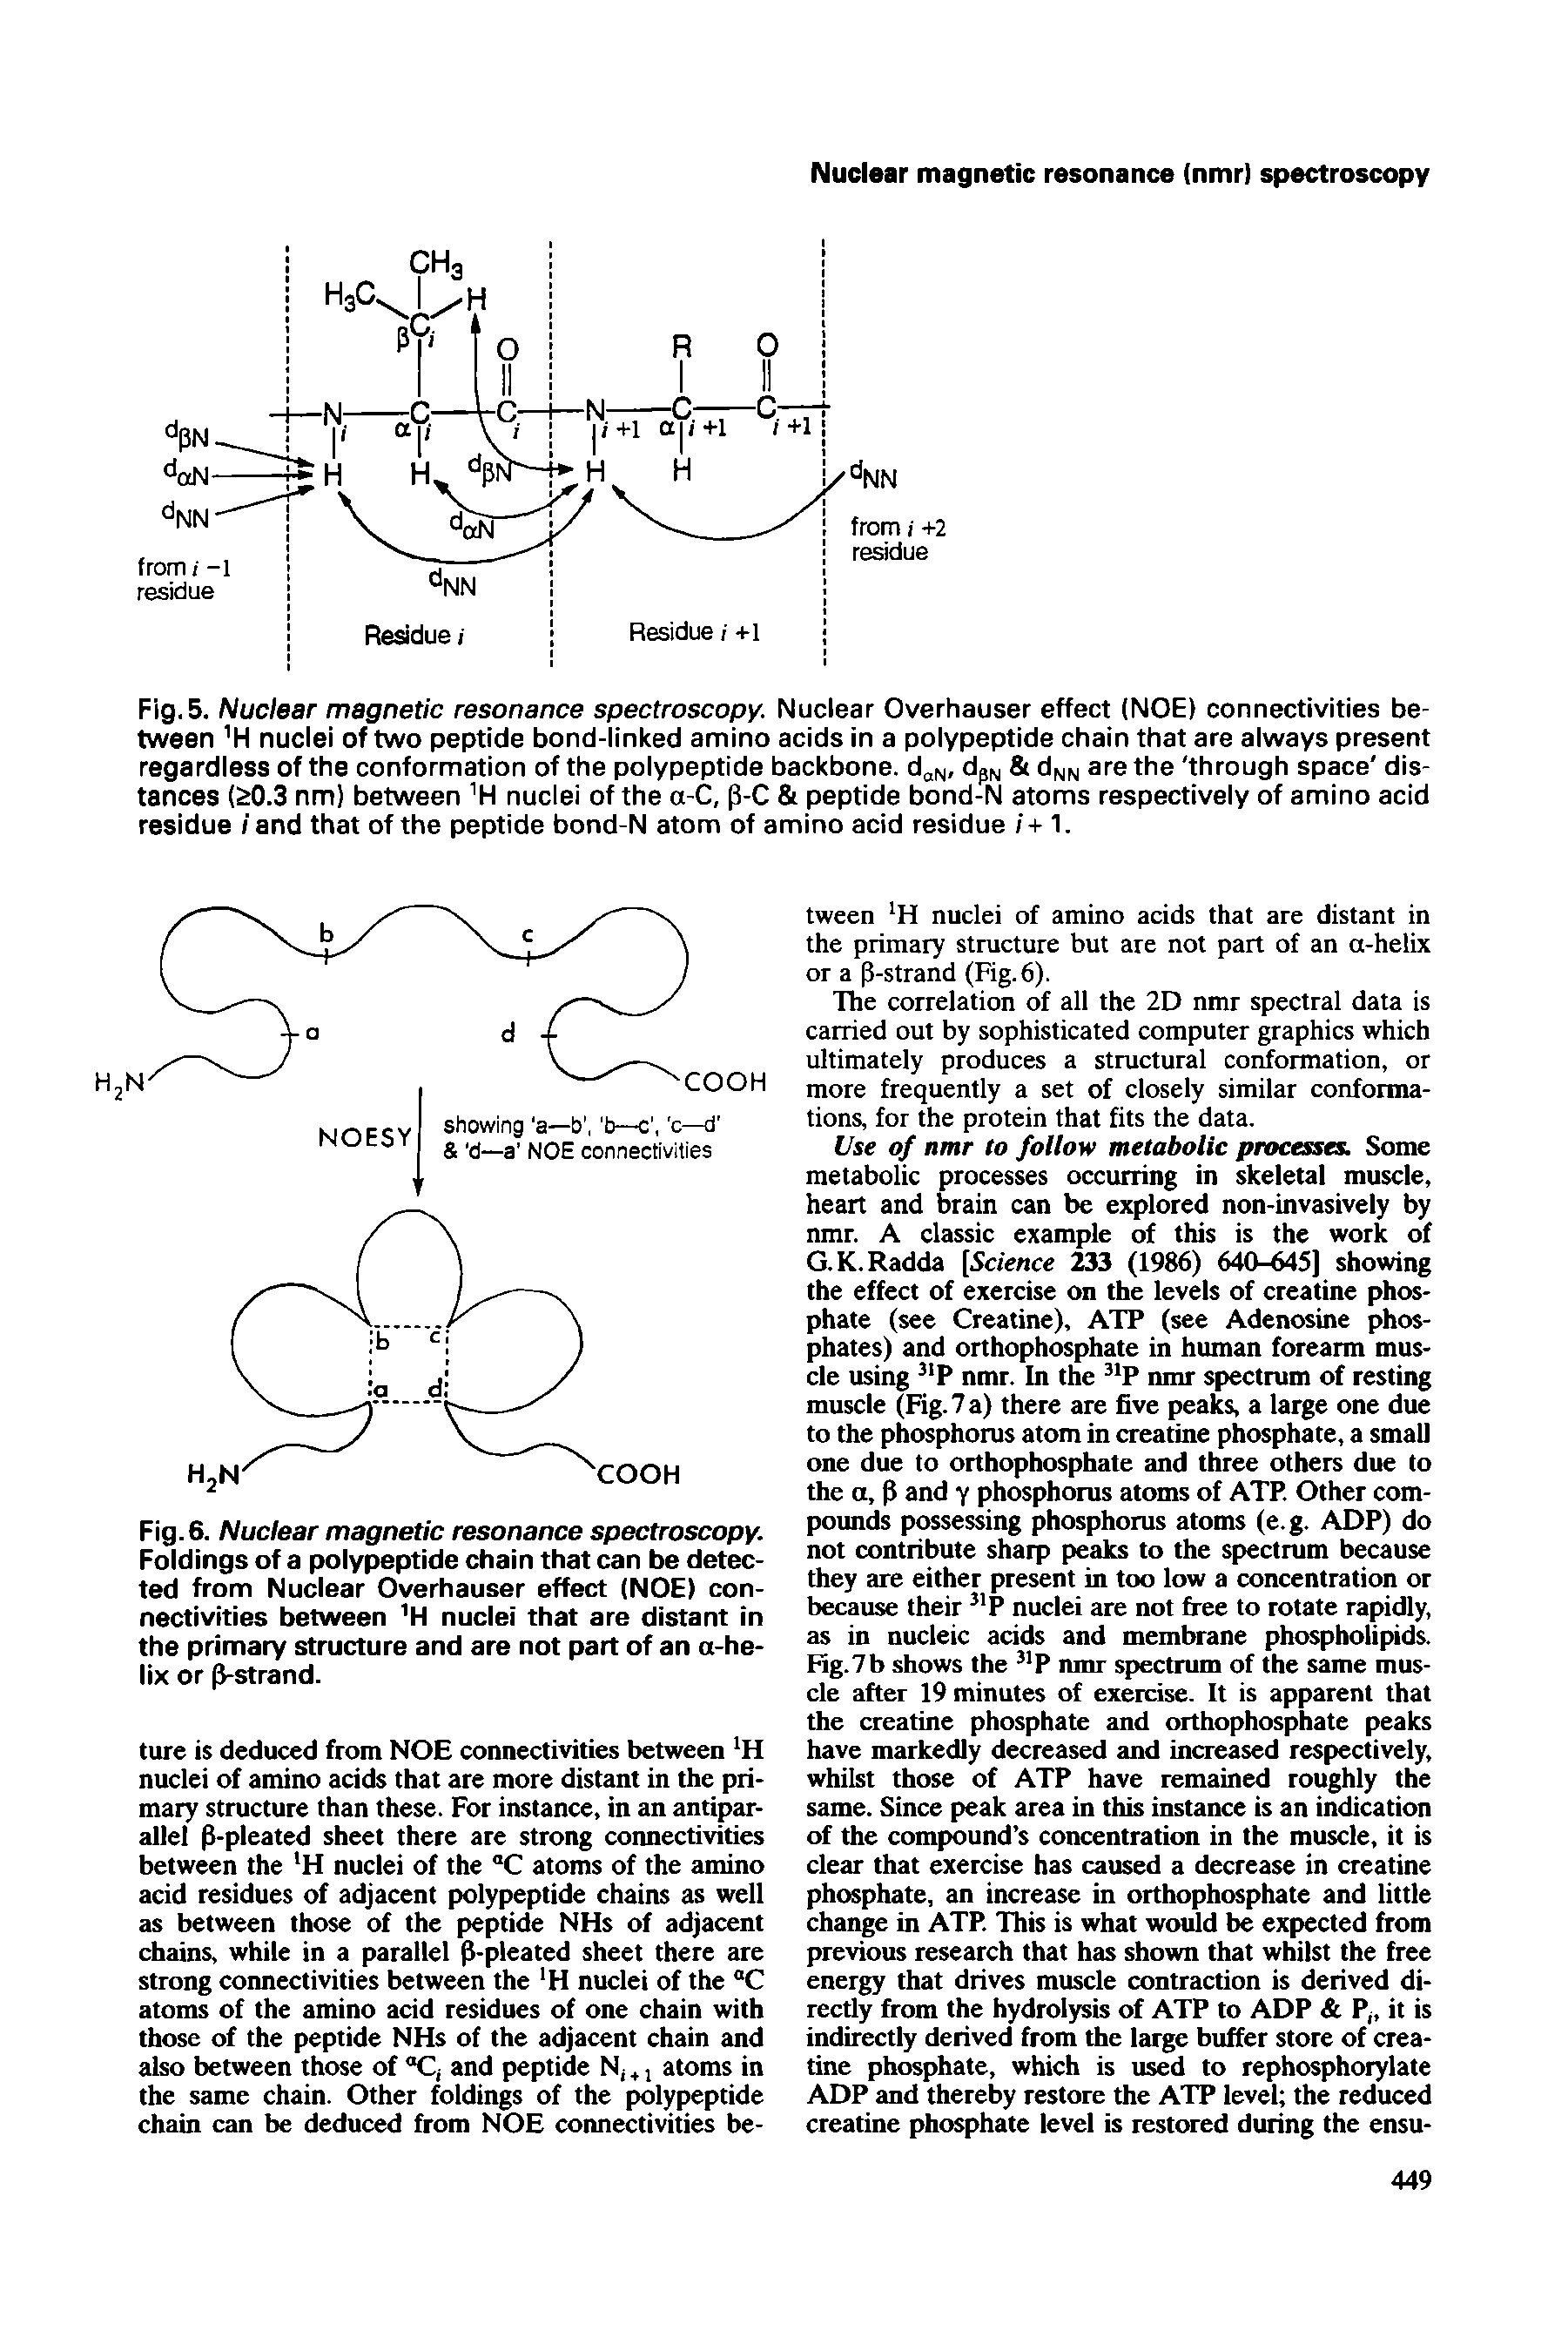 Fig. 5. Nuclear magnetic resonance spectroscopy. Nuclear Overhauser effect (NOE) connectivities between H nuclei of two peptide bond-linked amino acids in a polypeptide chain that are always present regardless of the conformation of the polypeptide backbone. d N, d N dNN are the through space distances (S0.3 nm) between H nuclei of the a-C, p-C peptide bond-N atoms respectively of amino acid residue / and that of the peptide bond-N atom of amino acid residue -i-1.